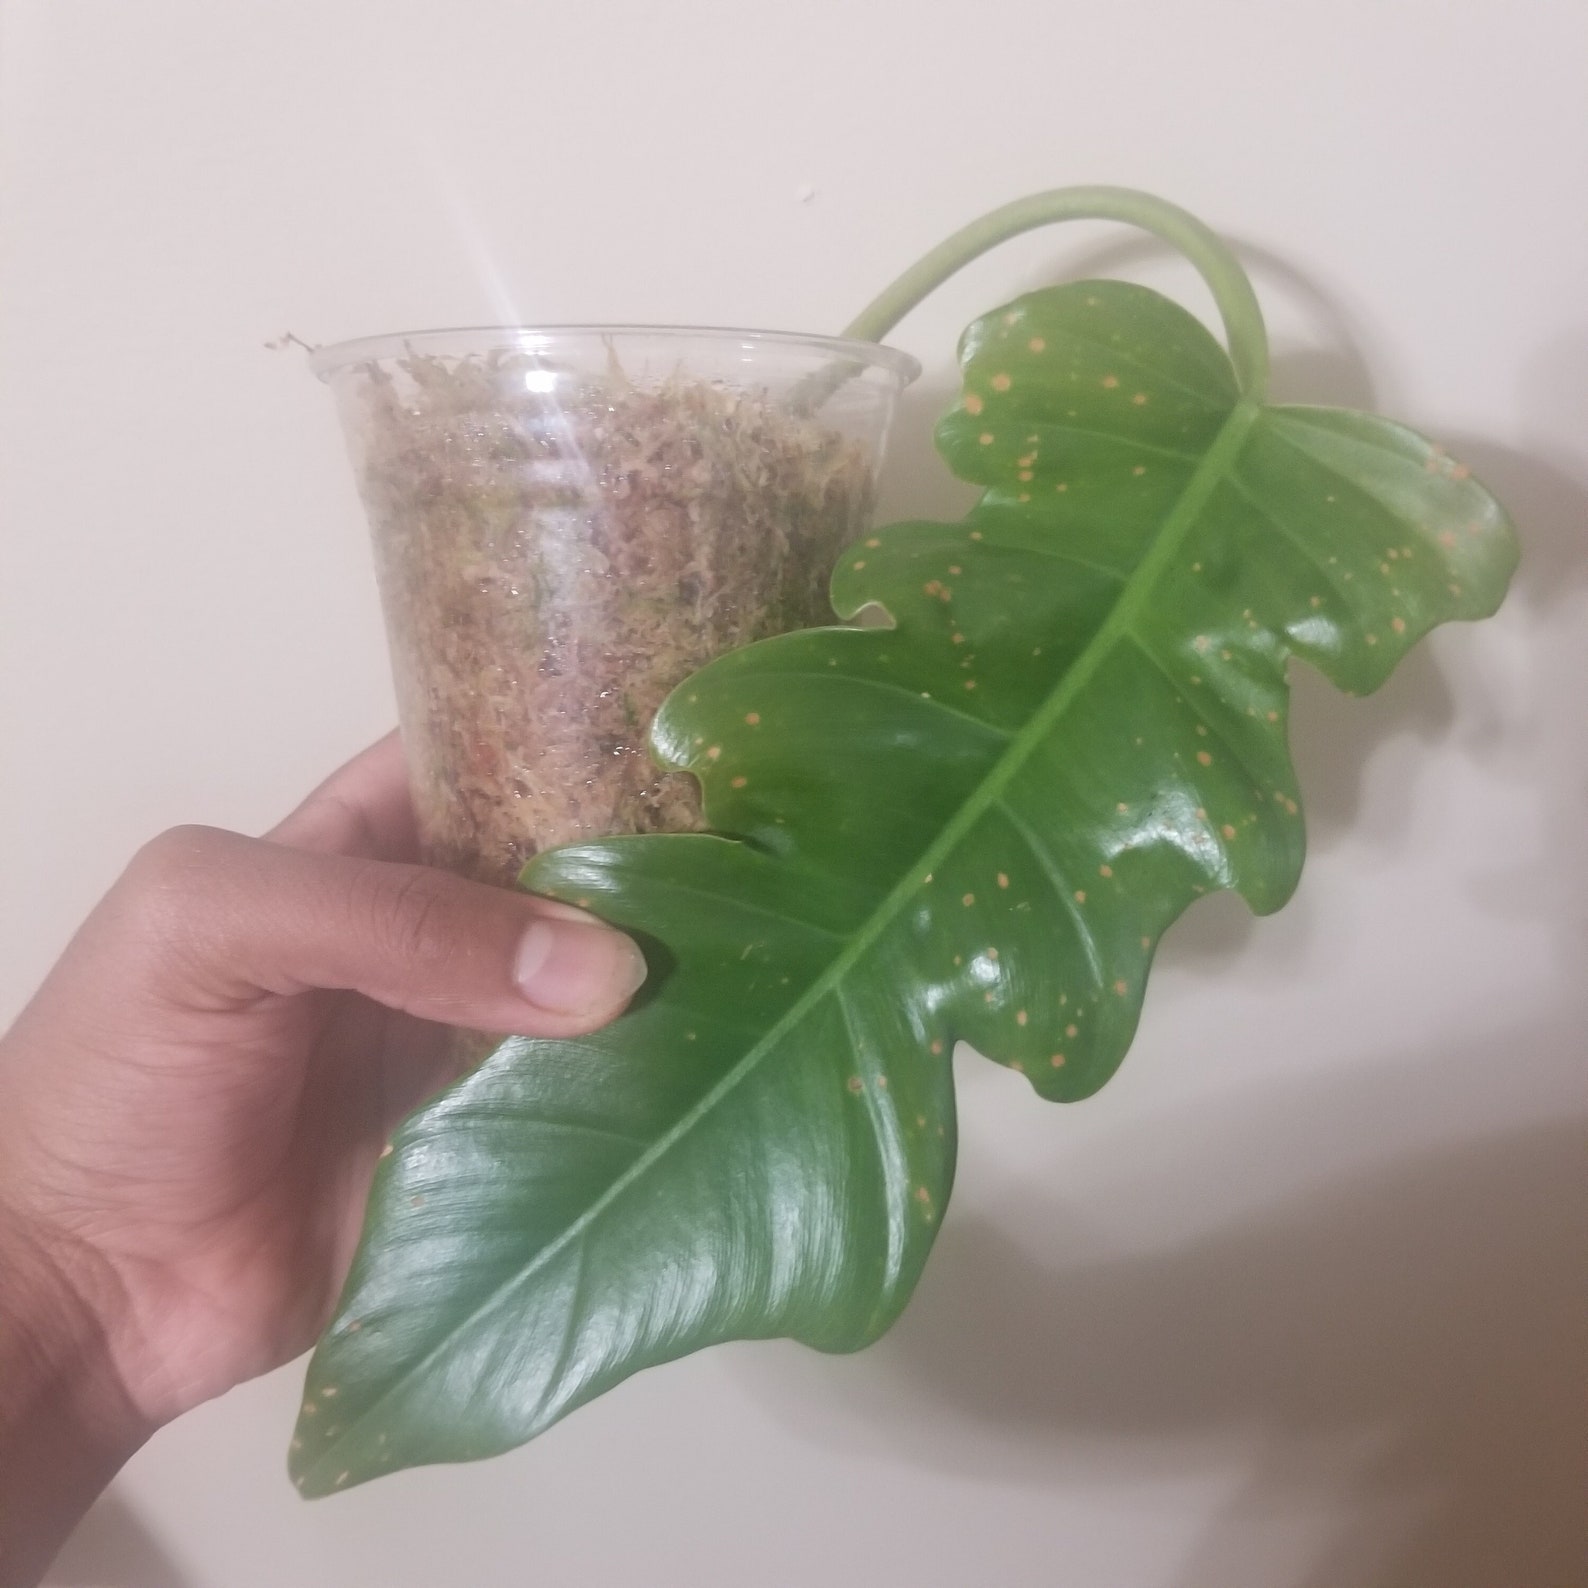 philodendron varieties